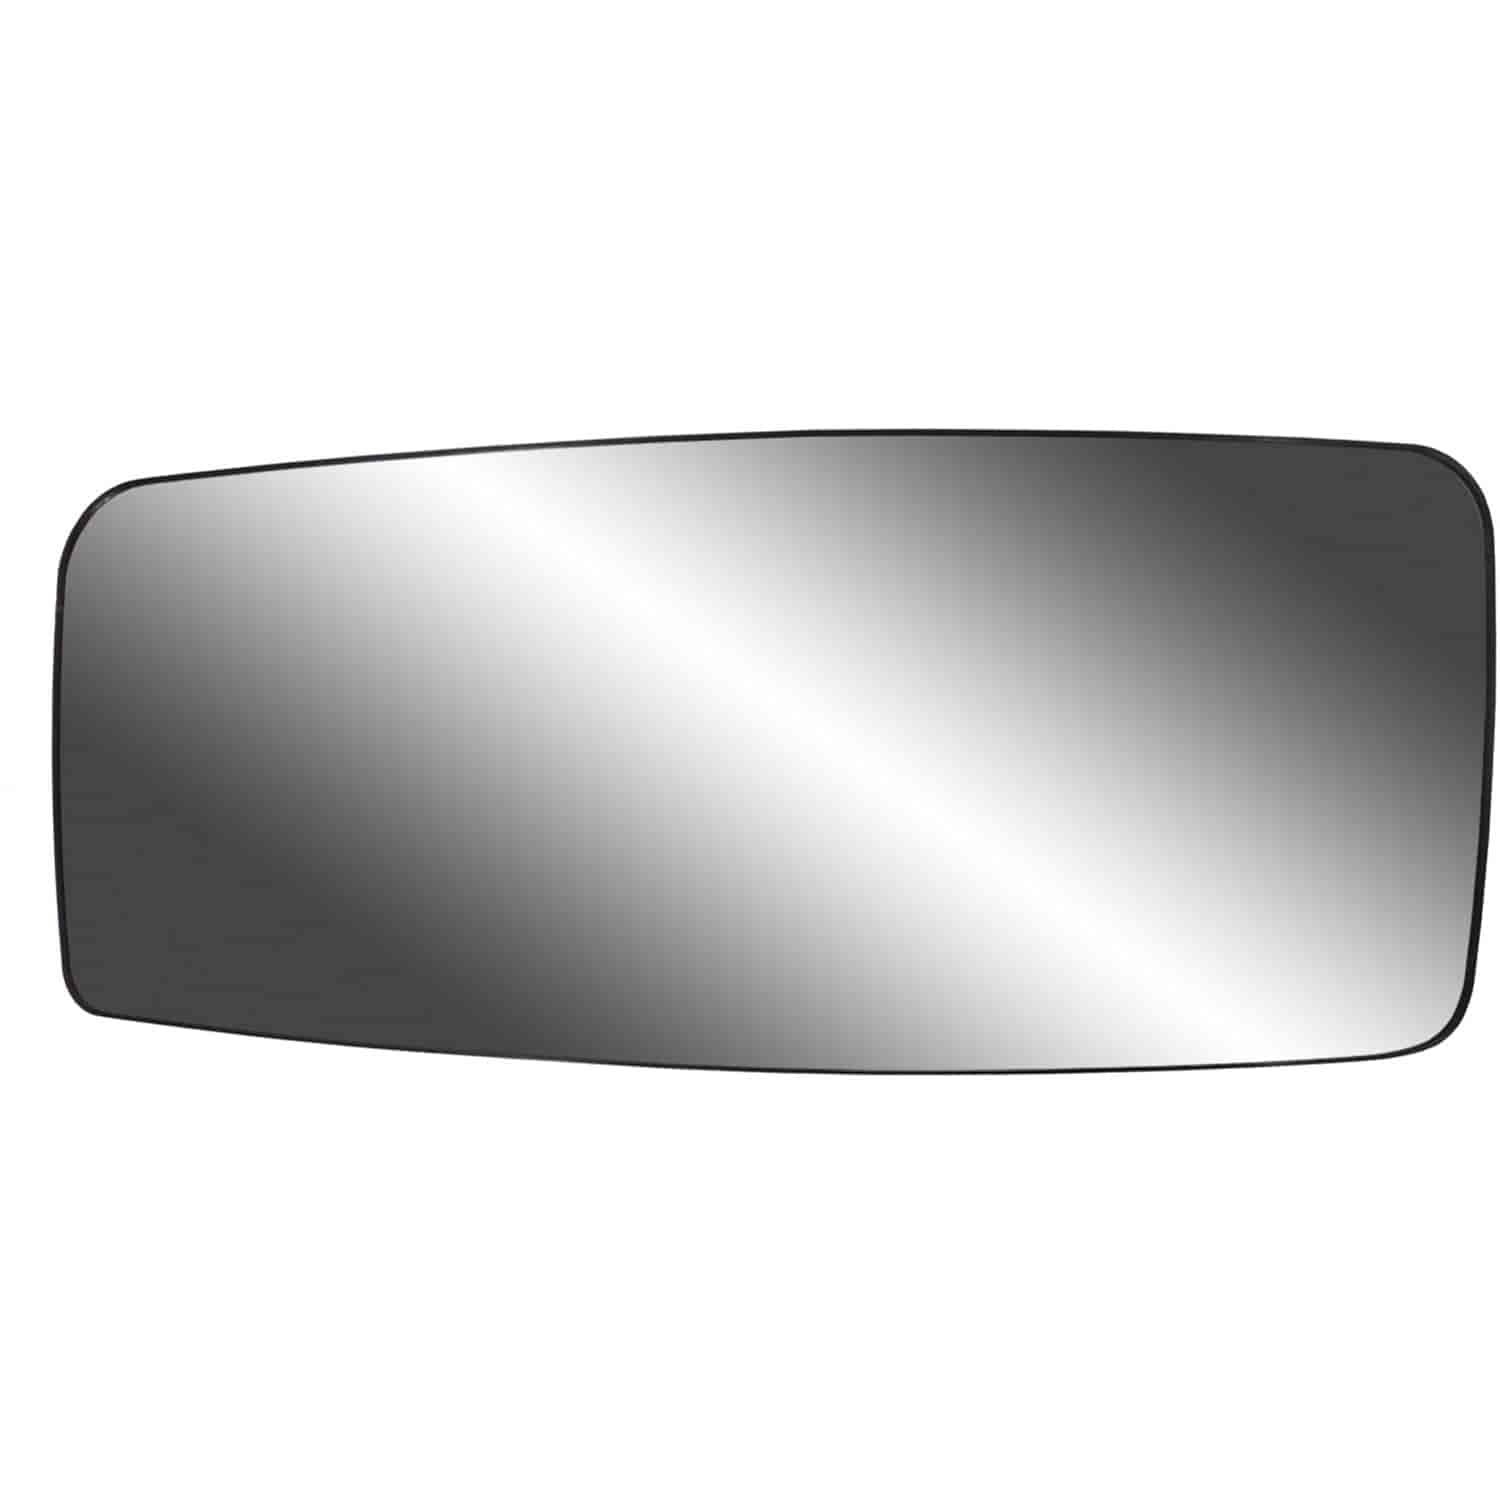 Replacement Glass Assembly for 04-12 F150 towing mirror